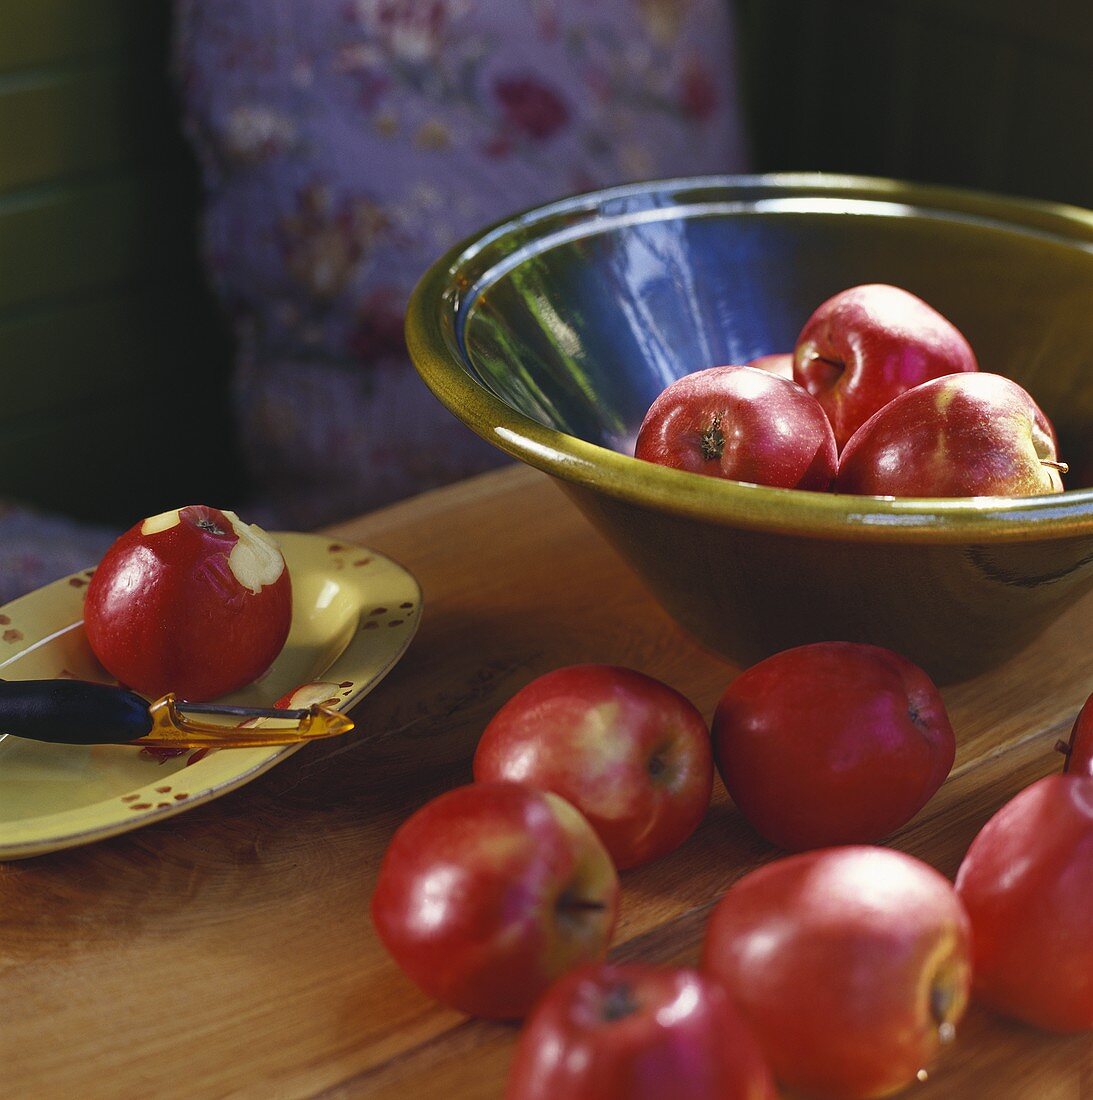 Red apples in bowl, on wooden table and on plate